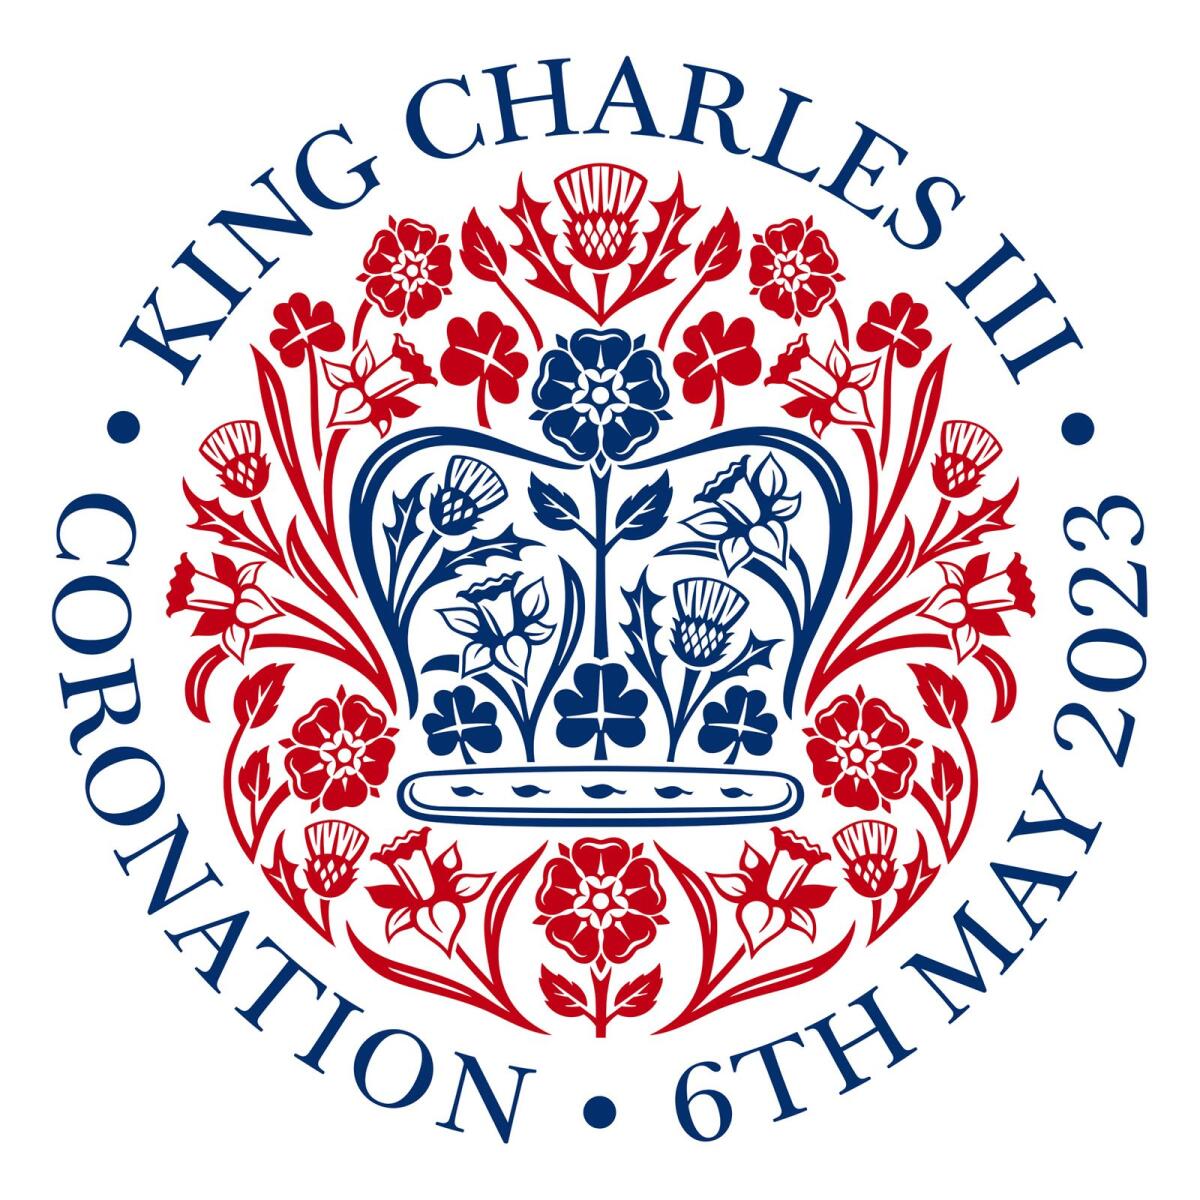 The English version of the official Coronation emblem of King Charles III and Camilla, the Queen Consort. — AP